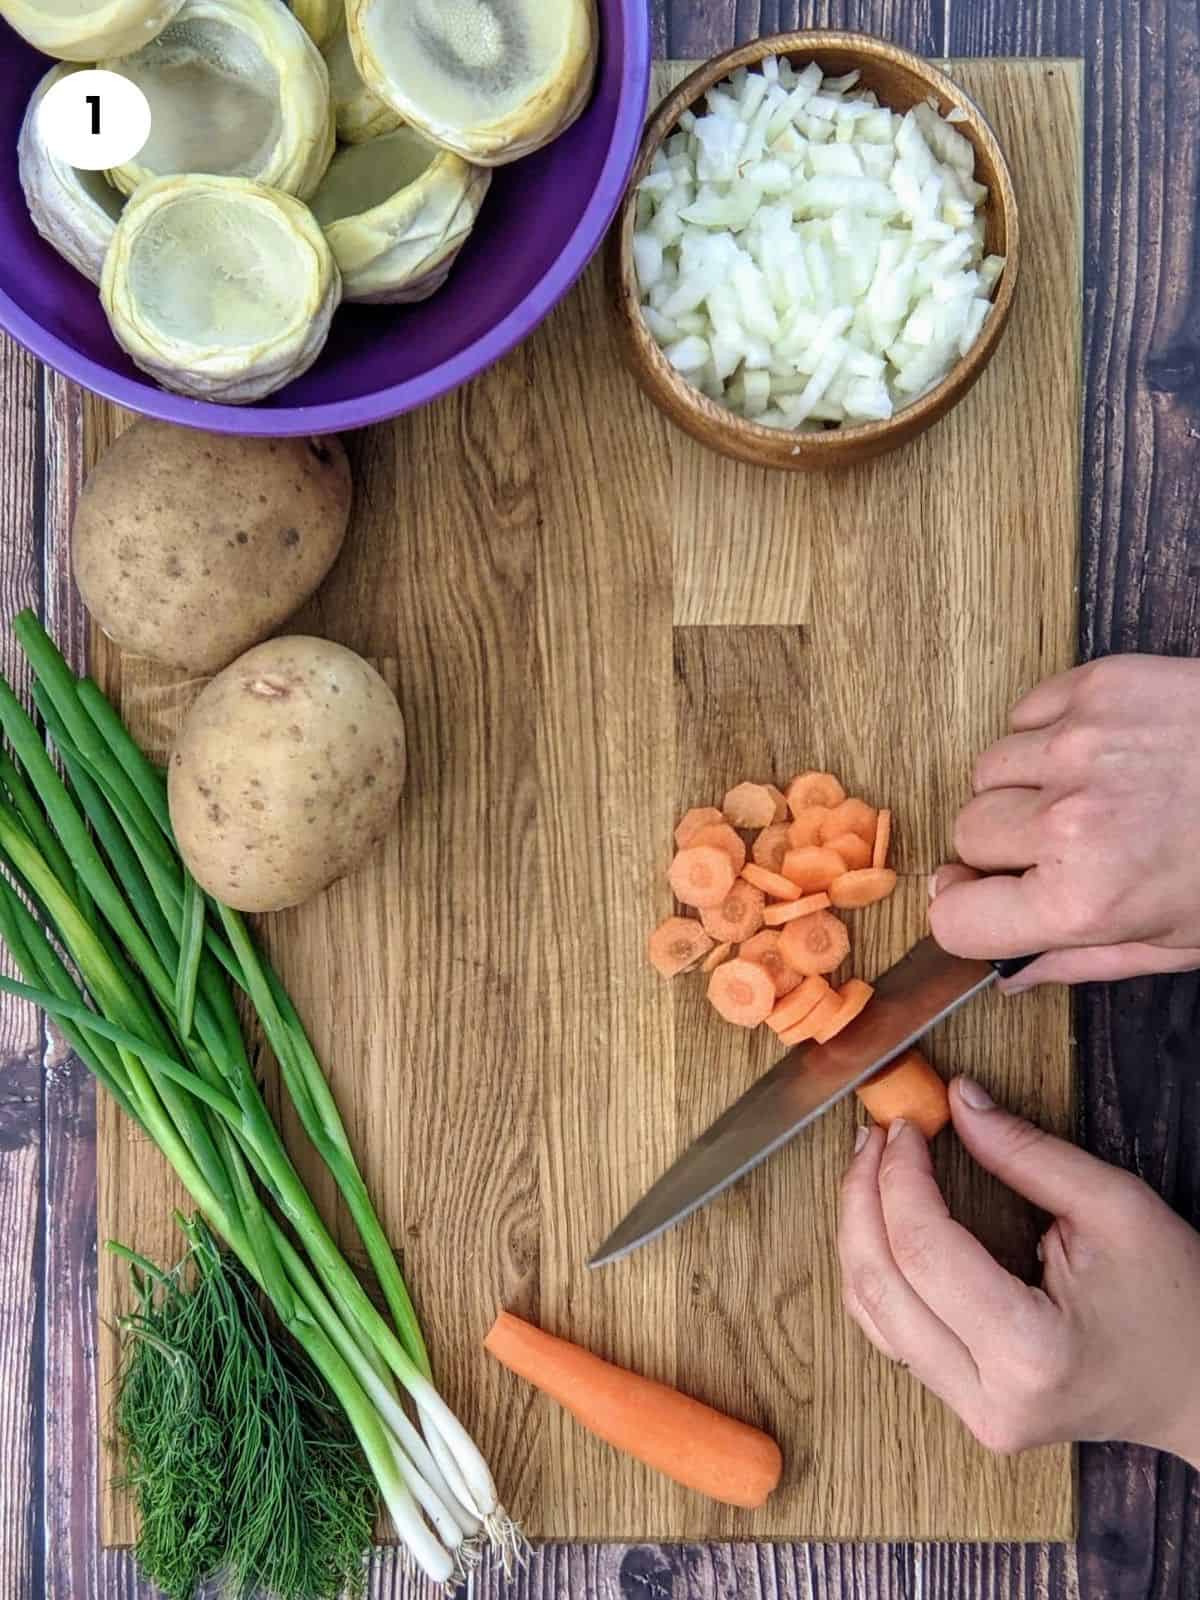 Chopping carrots in slices for artichoke stew.